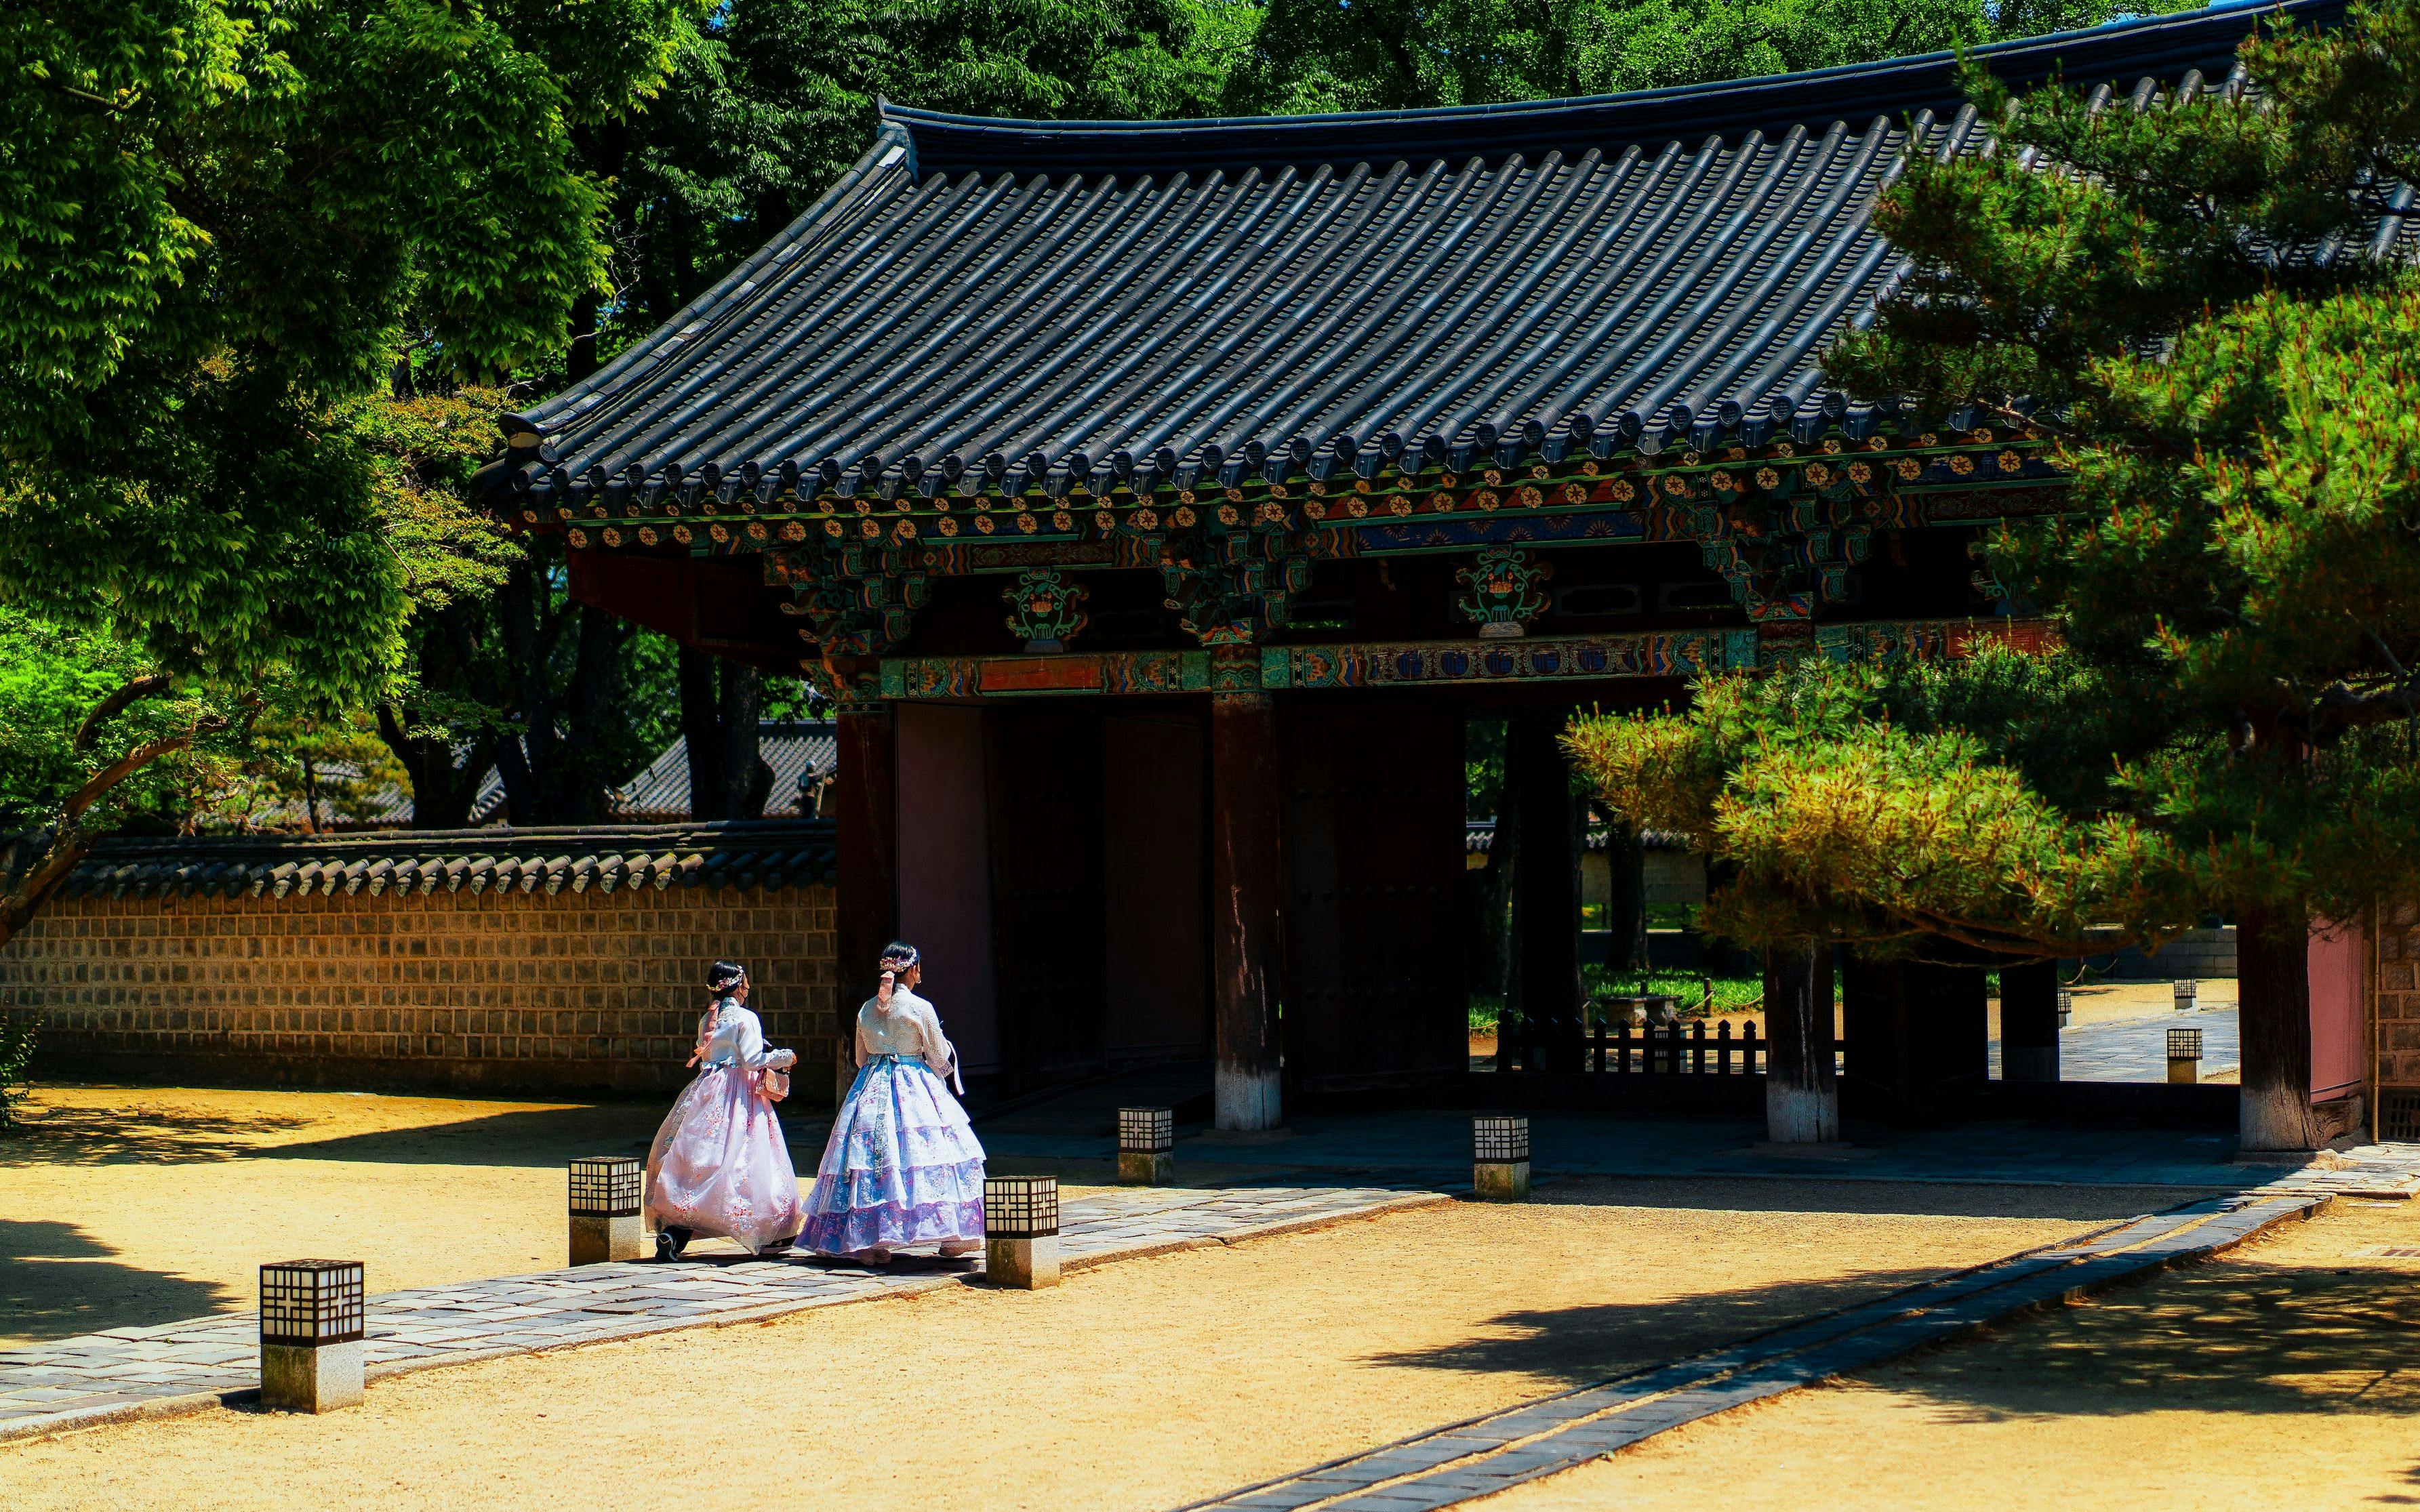 Women in traditional costumes walking into temple in South Korea.